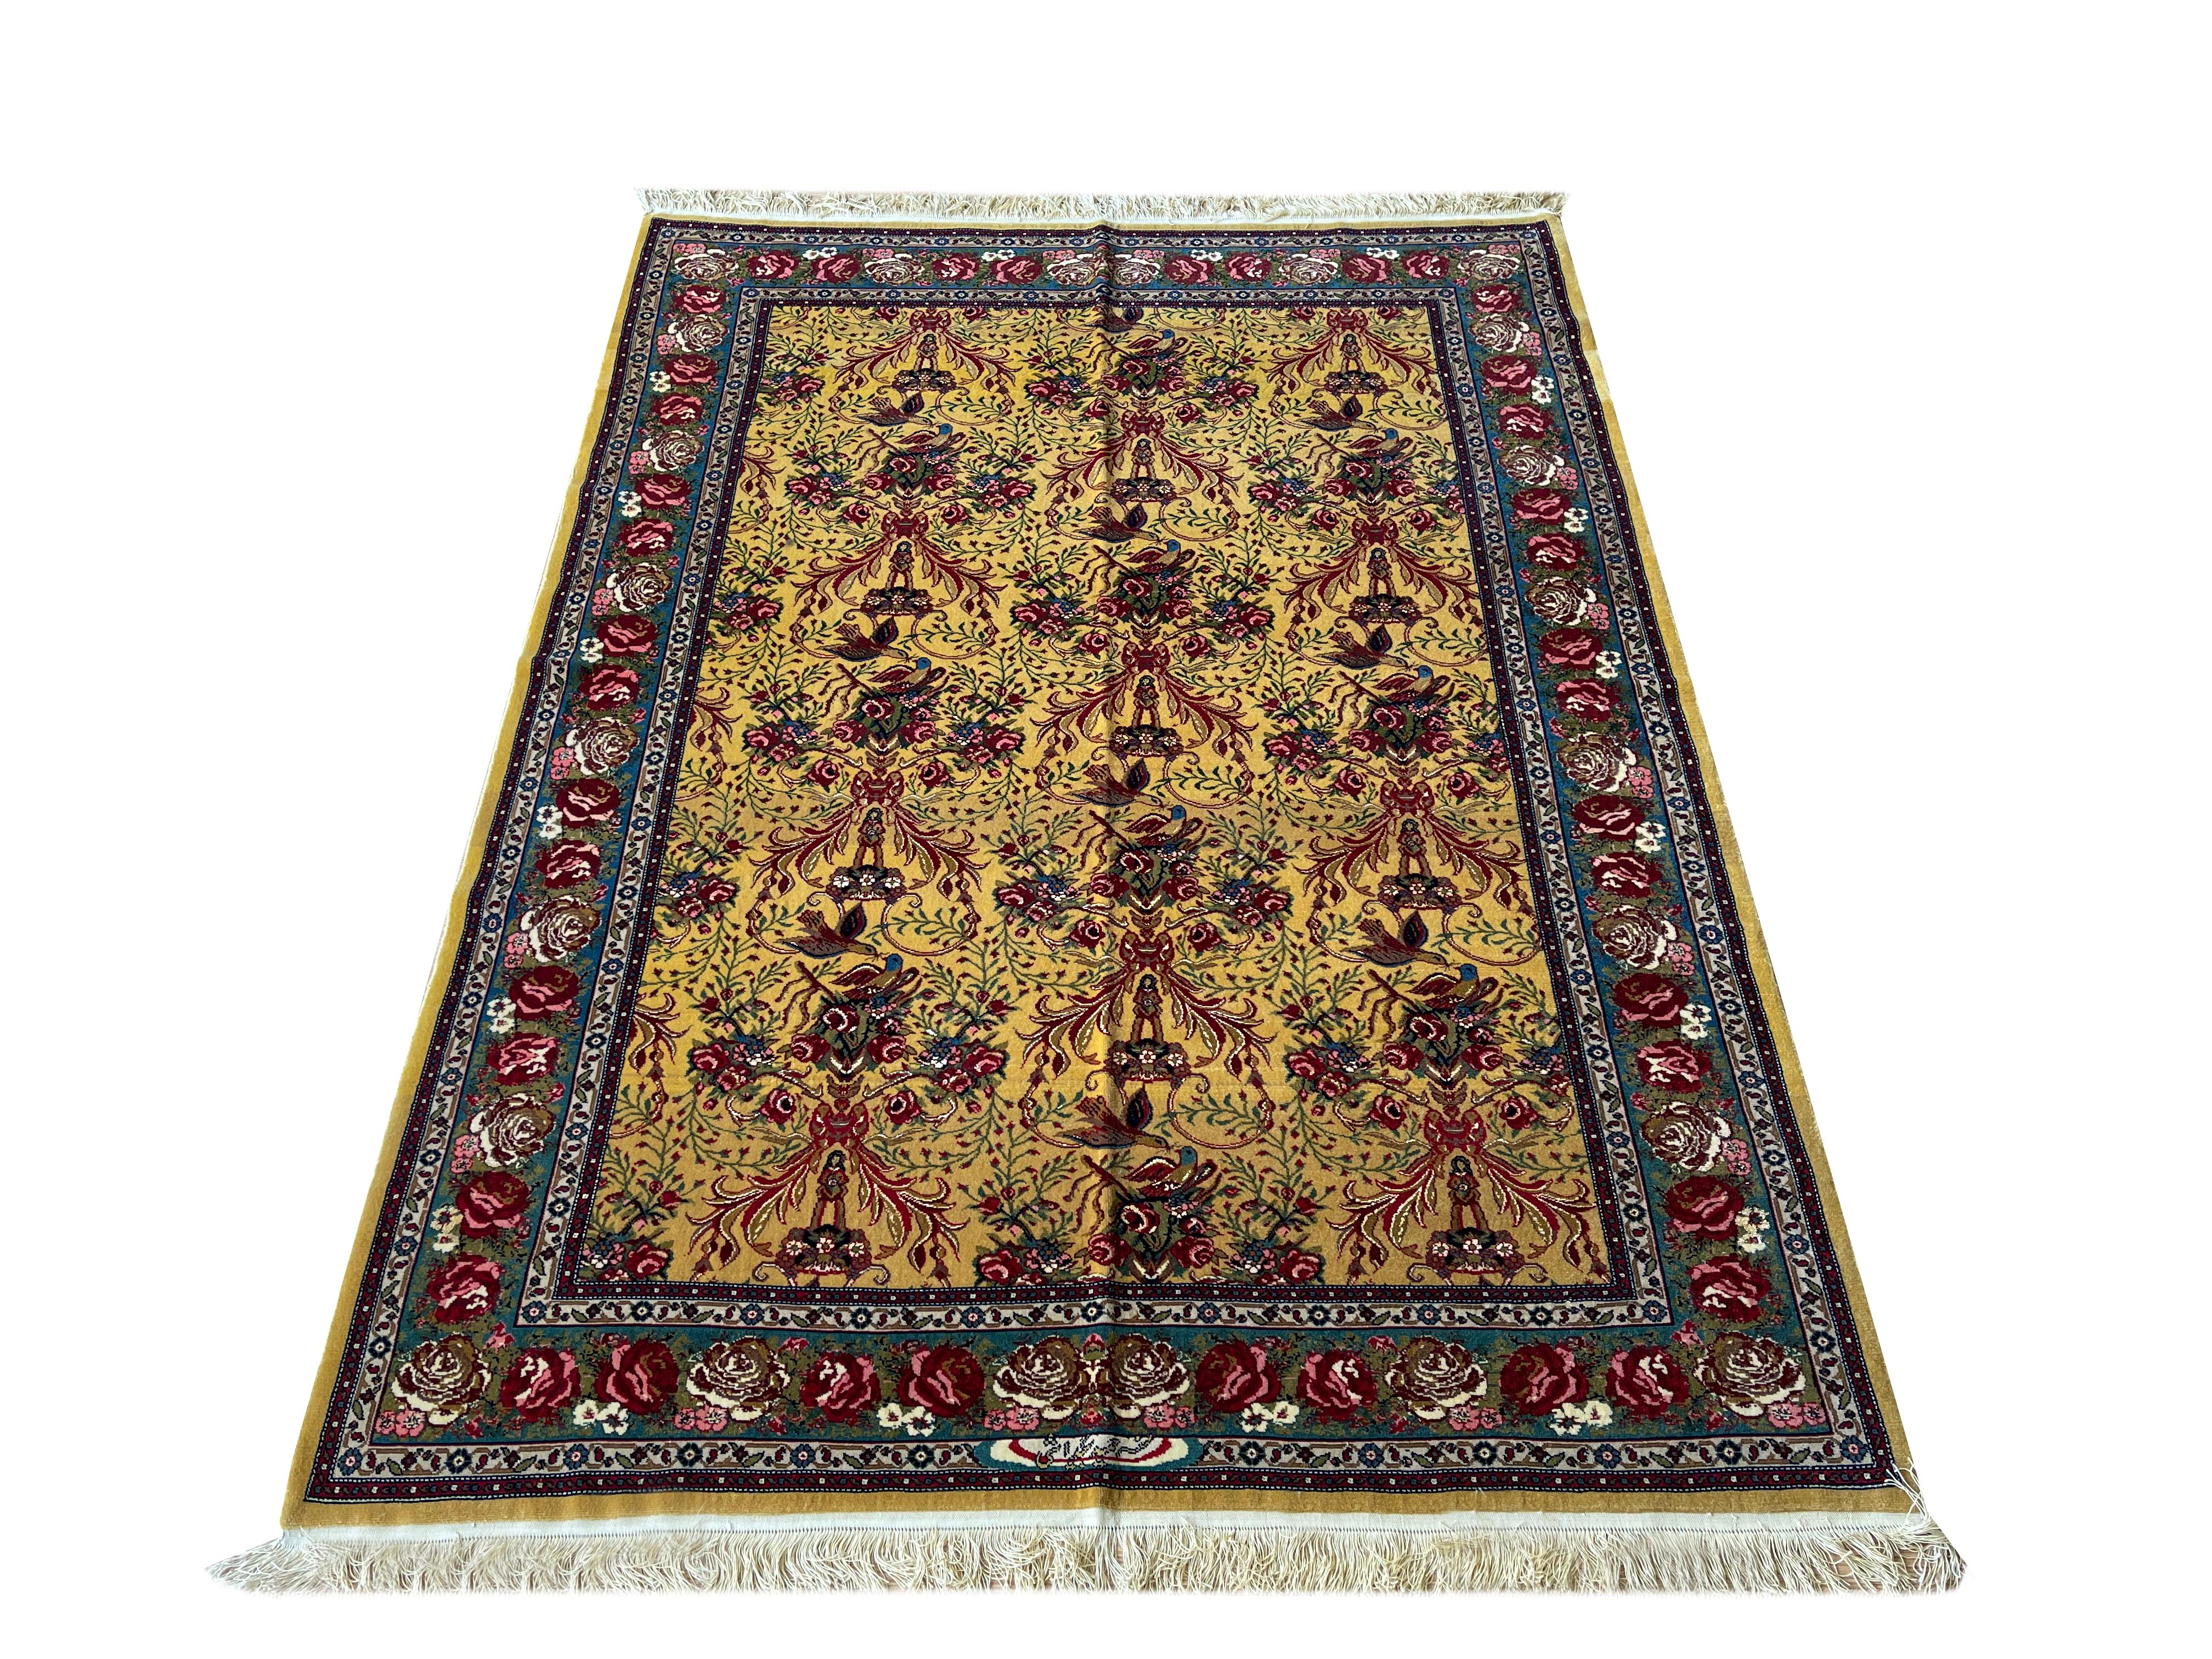 Exclusive vey fine handmade rug made of high-quality materials and designed from a very high-end rug workshop.
The background of this floral rug shows this glittery gold rug as very vivid and shiny. 
The design of this rug includes naturally